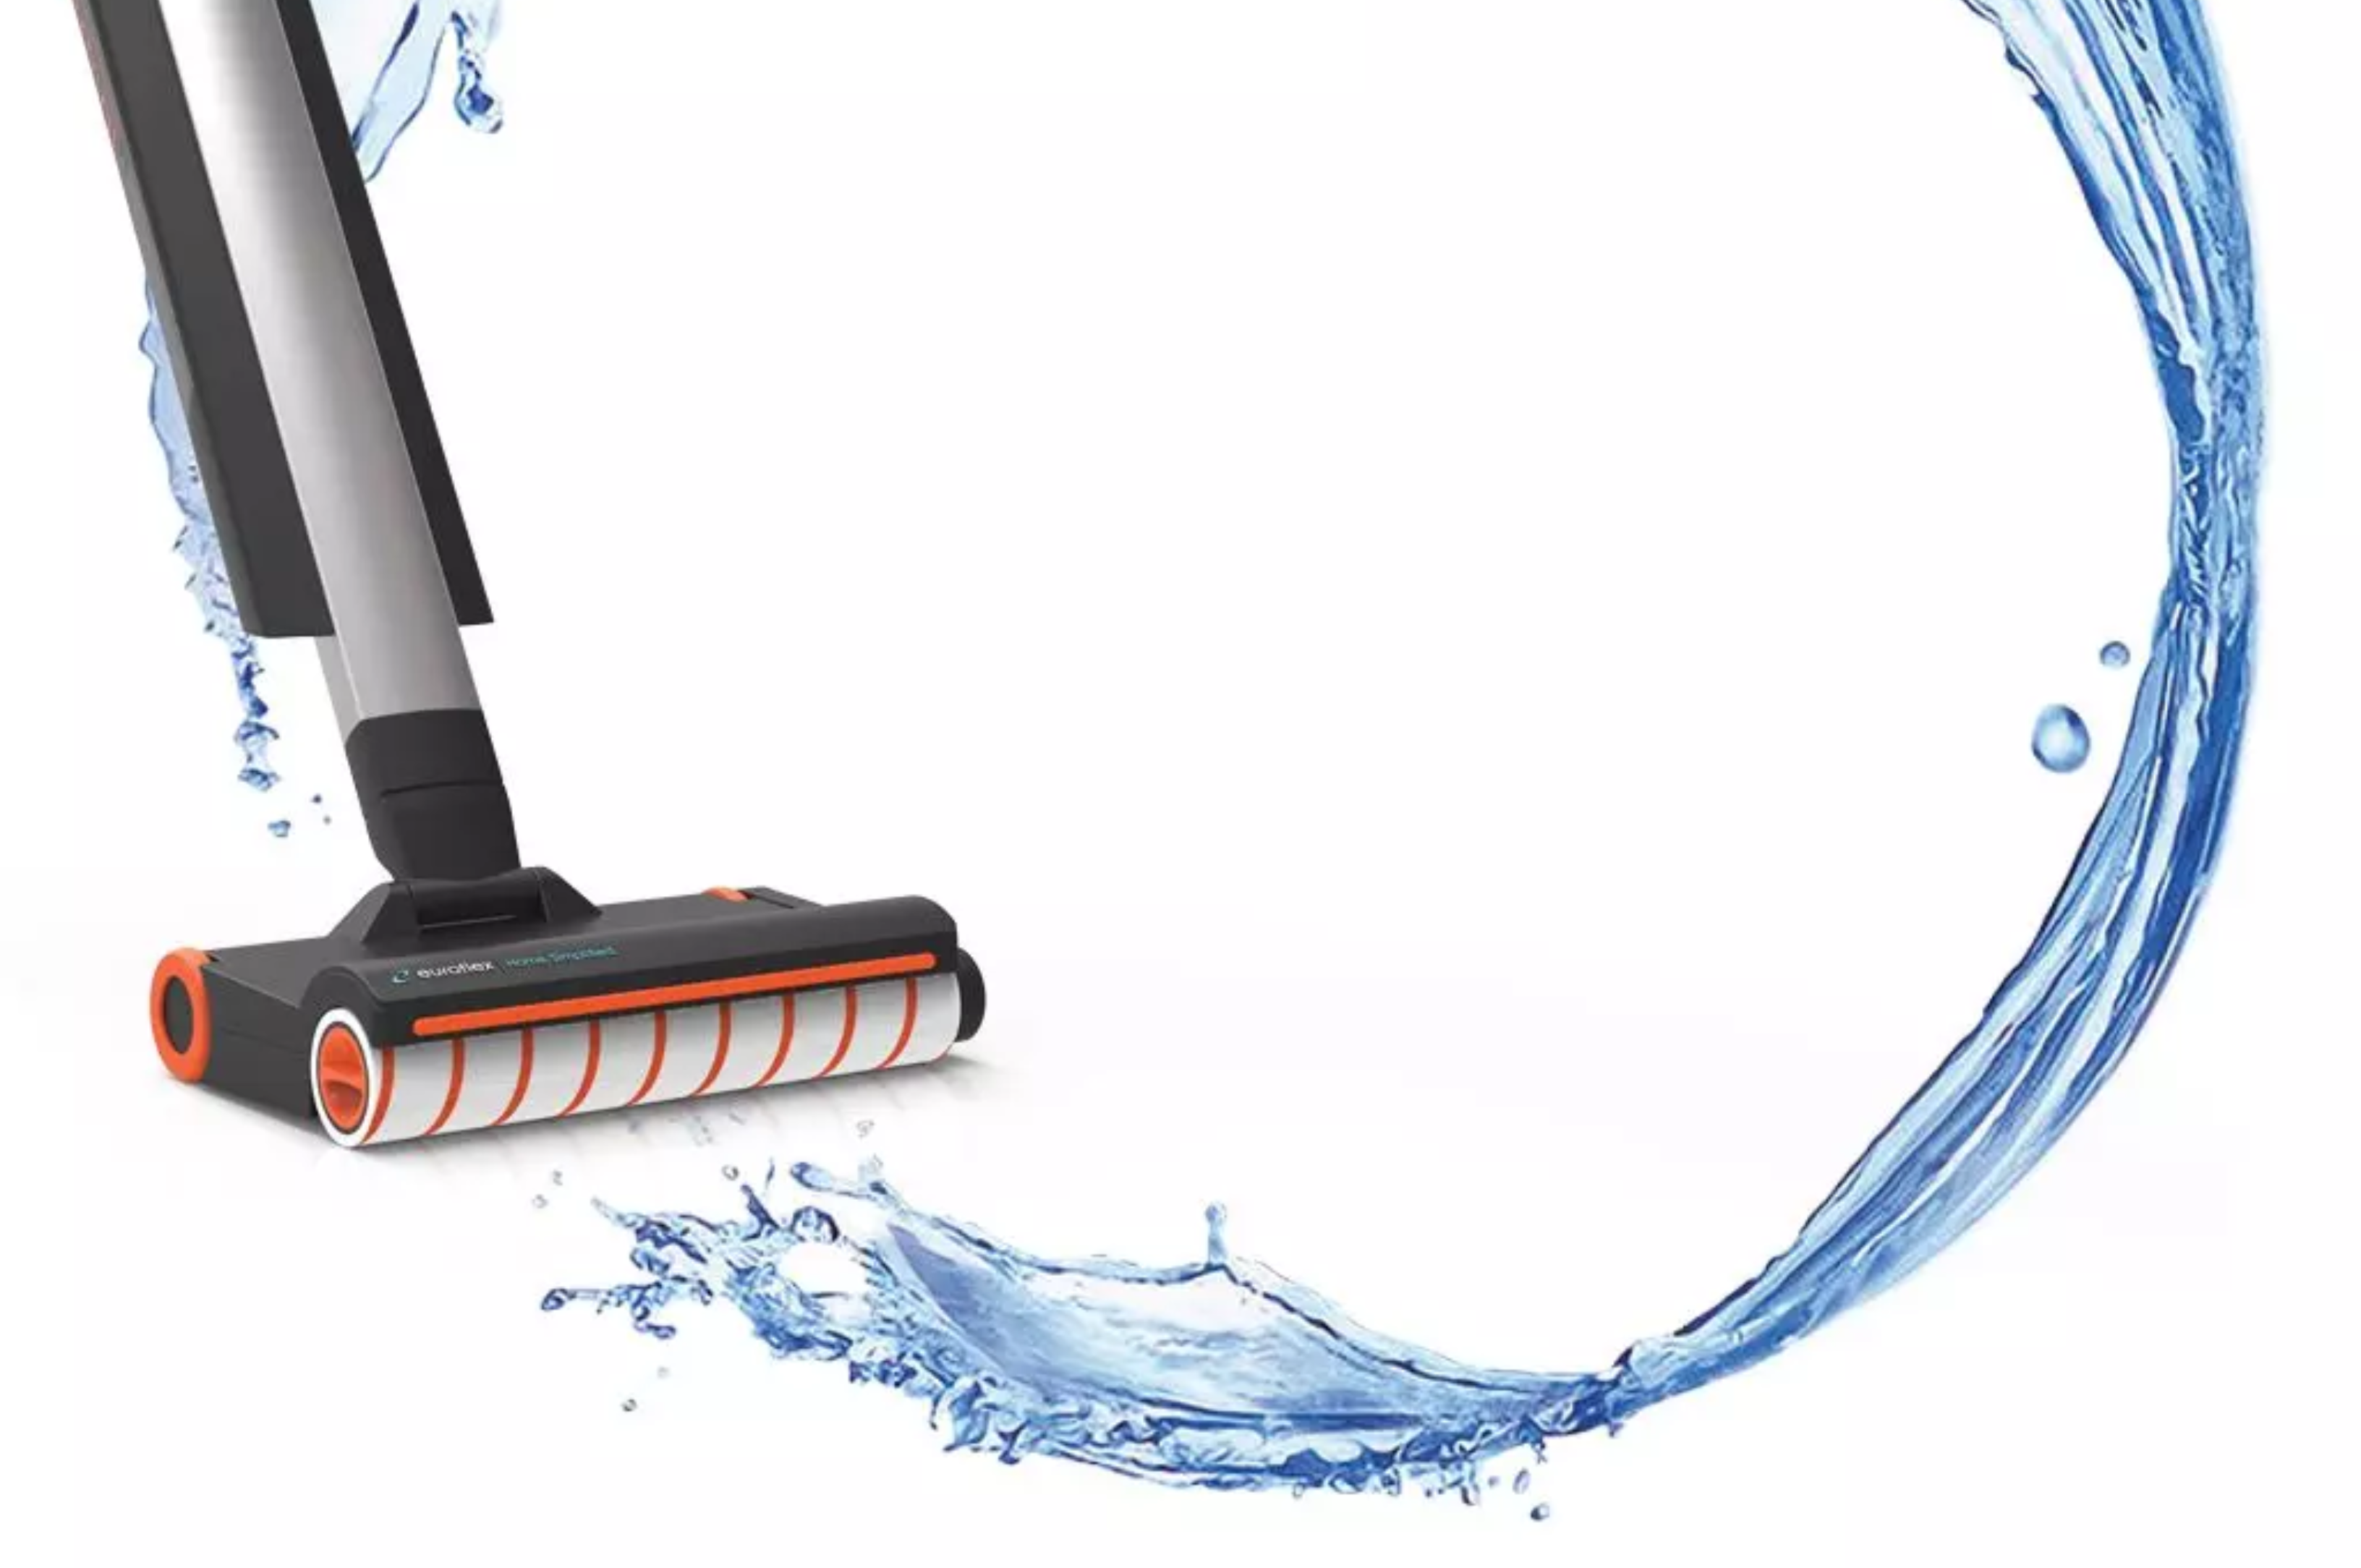 Euroflex presents Thermal Y1 the ultimate heated roller mop